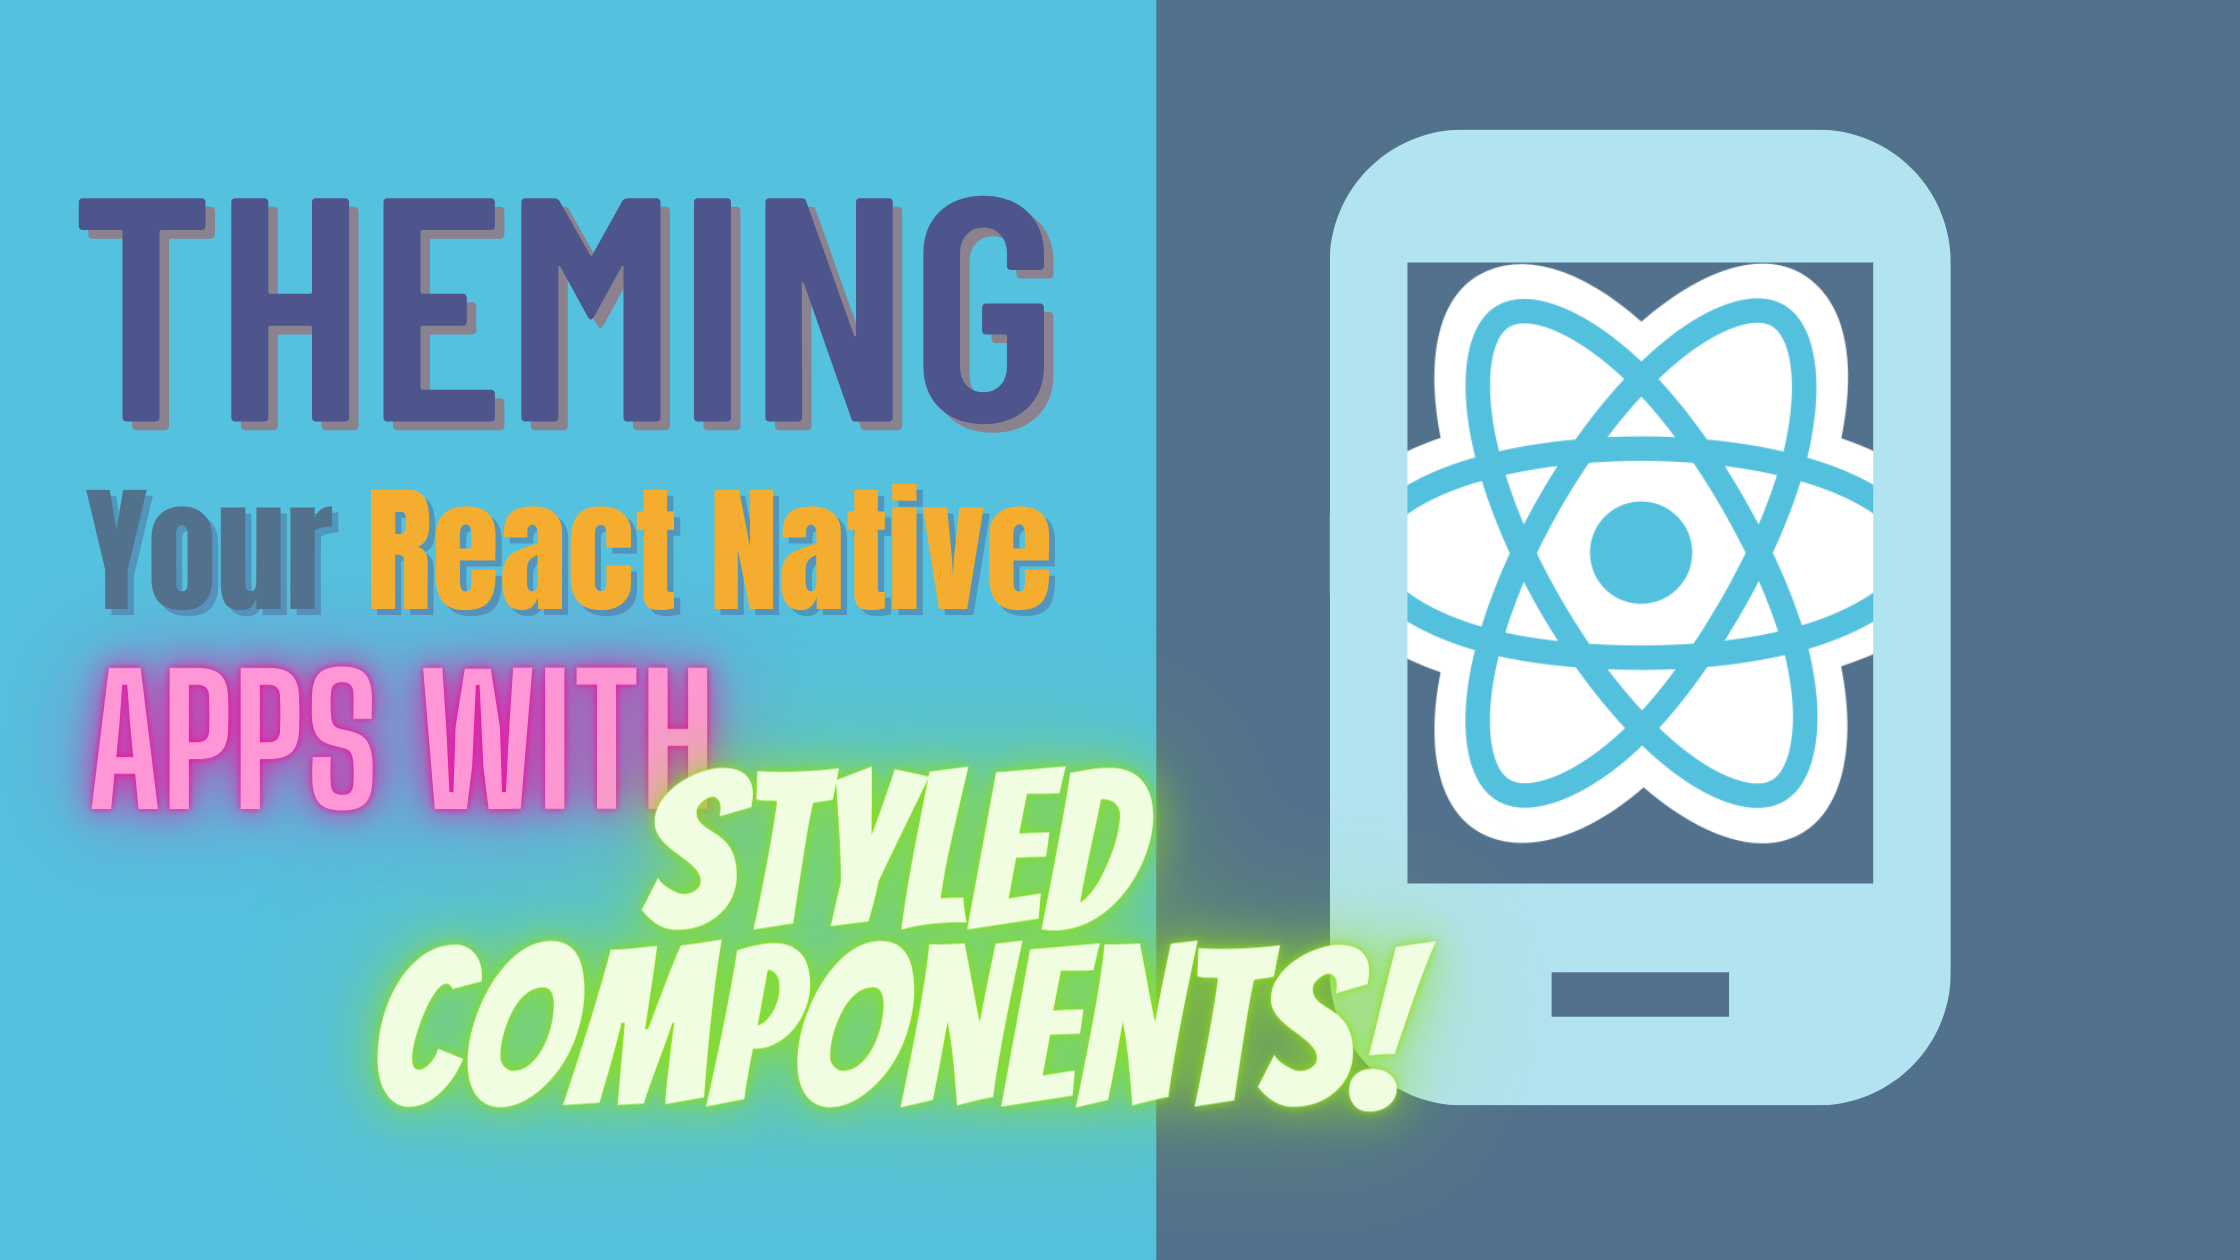 Theming React Native Applications with Styled Components